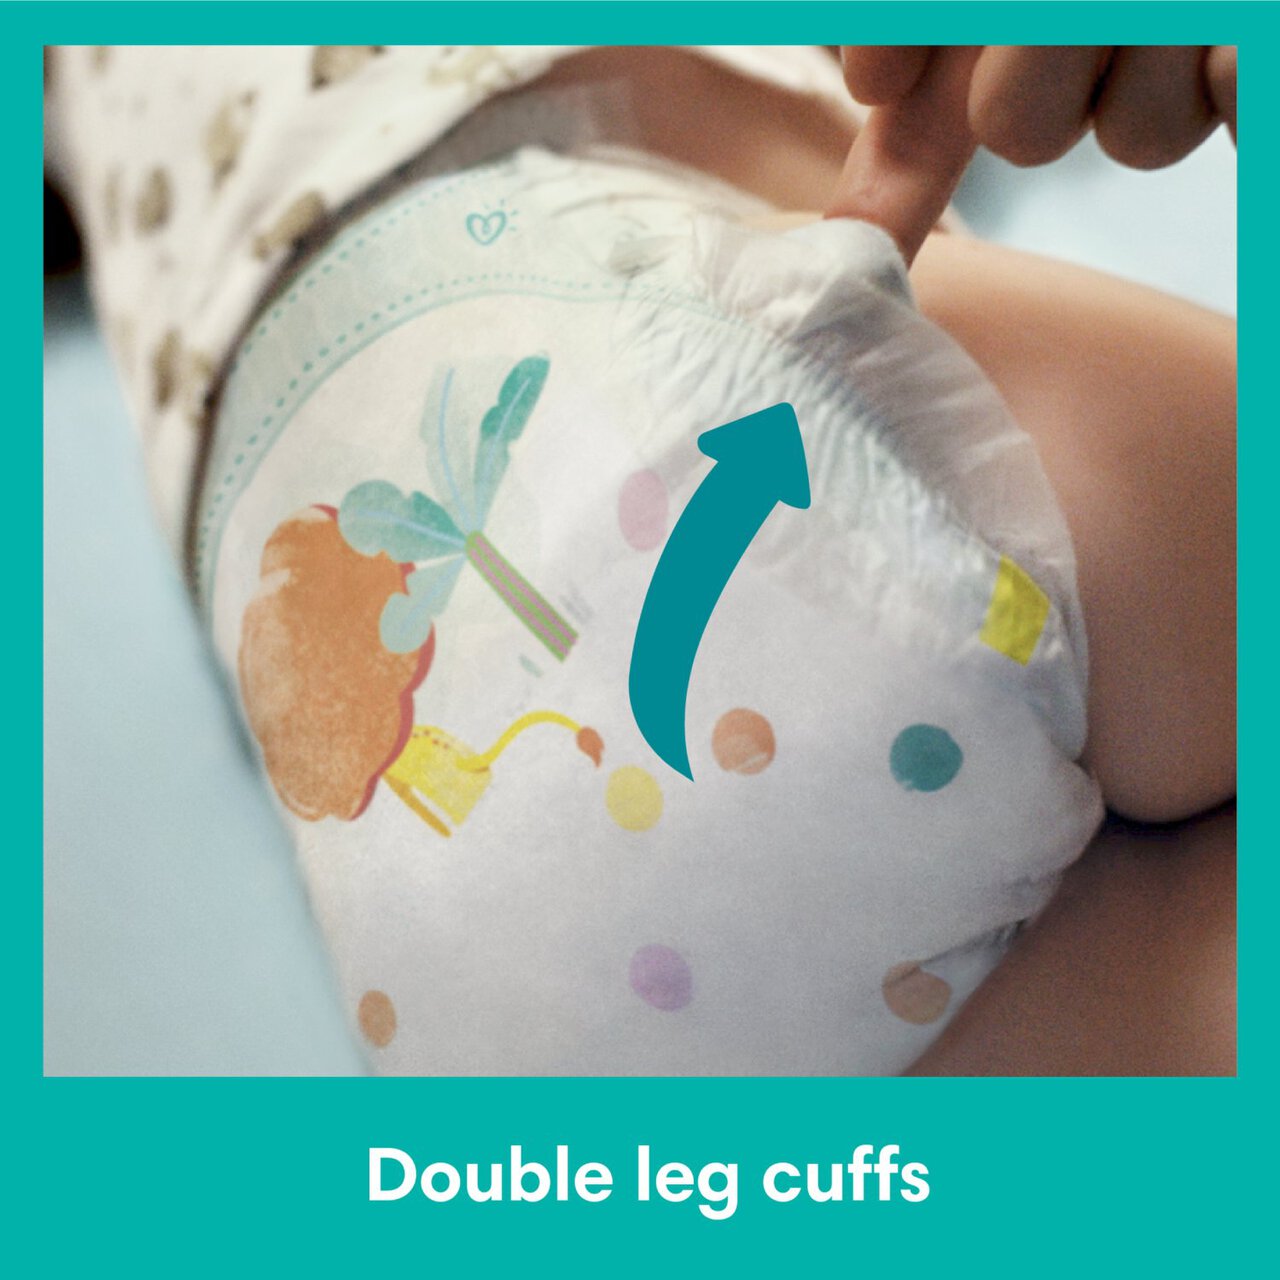 PAMPERS Baby-Dry Couch.culo.night 4 40pc